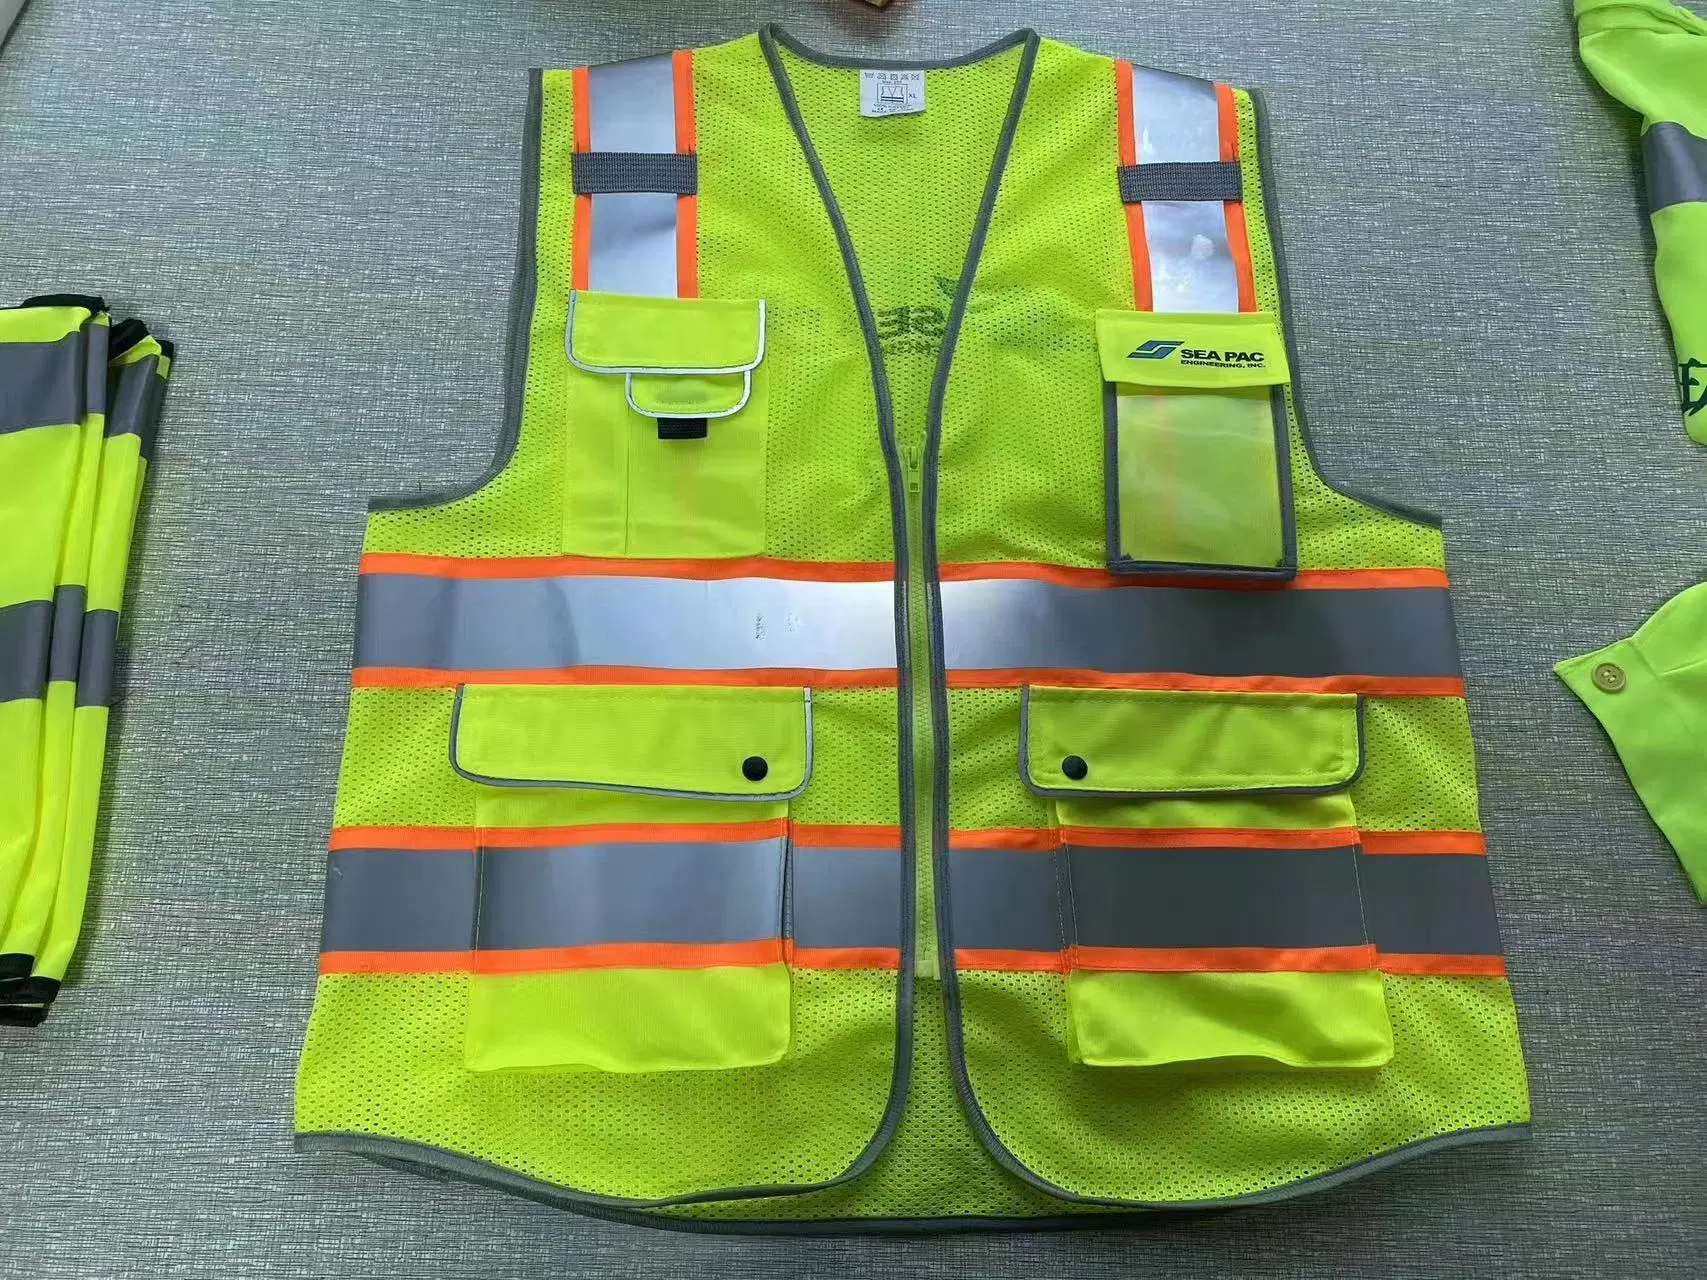 Custom Designs Class 2 Safety Reflective T Shirt for Sanitation Worker/Reflective Security Vest